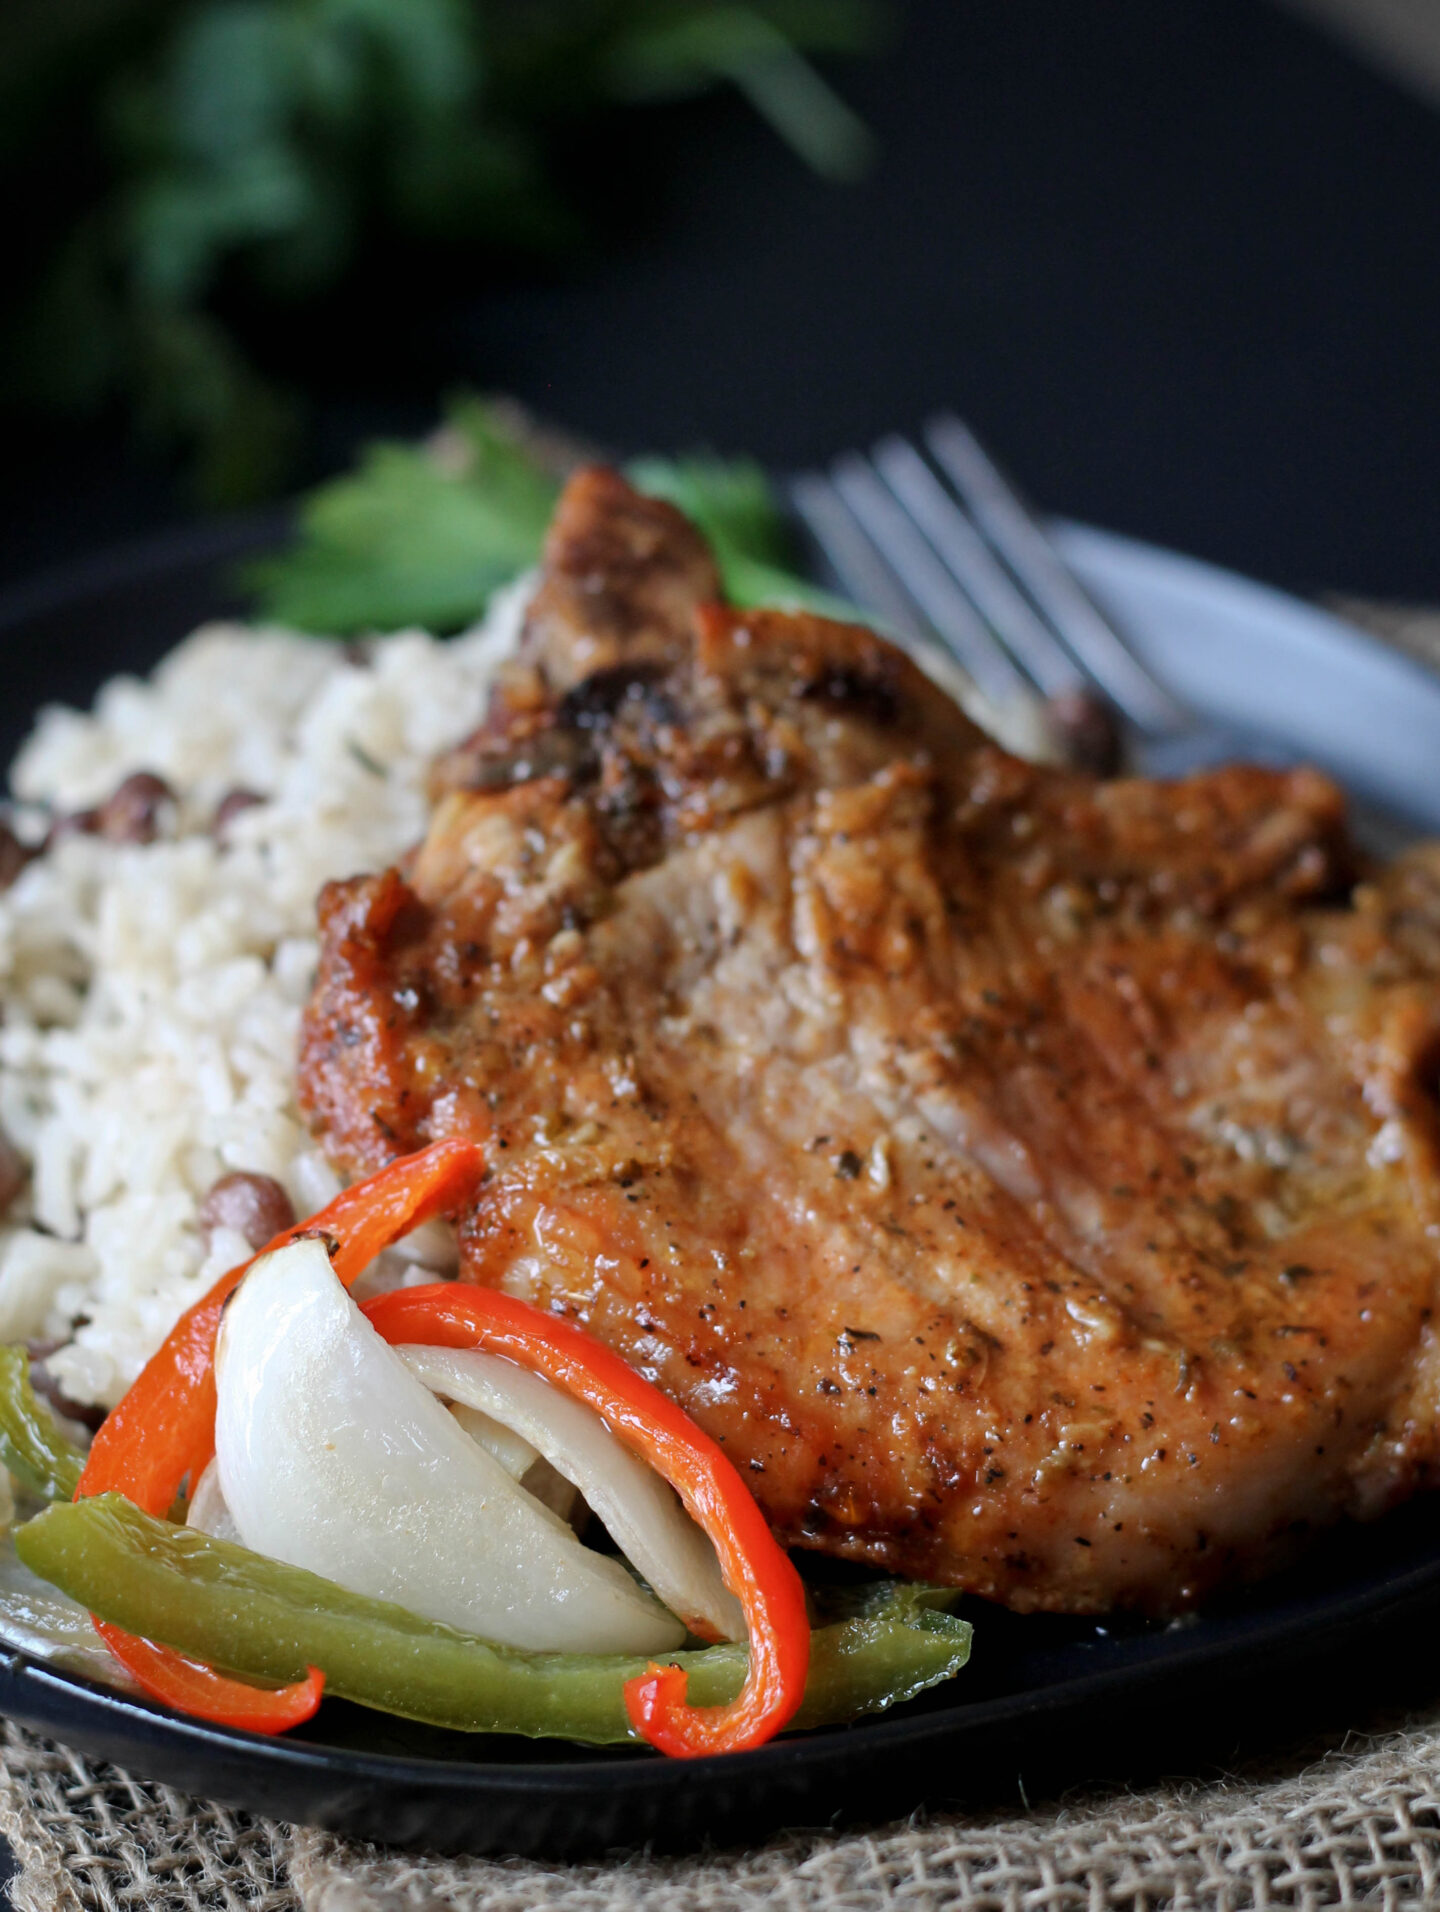 How to make juicy, tender and delicious Baked Pork Chops